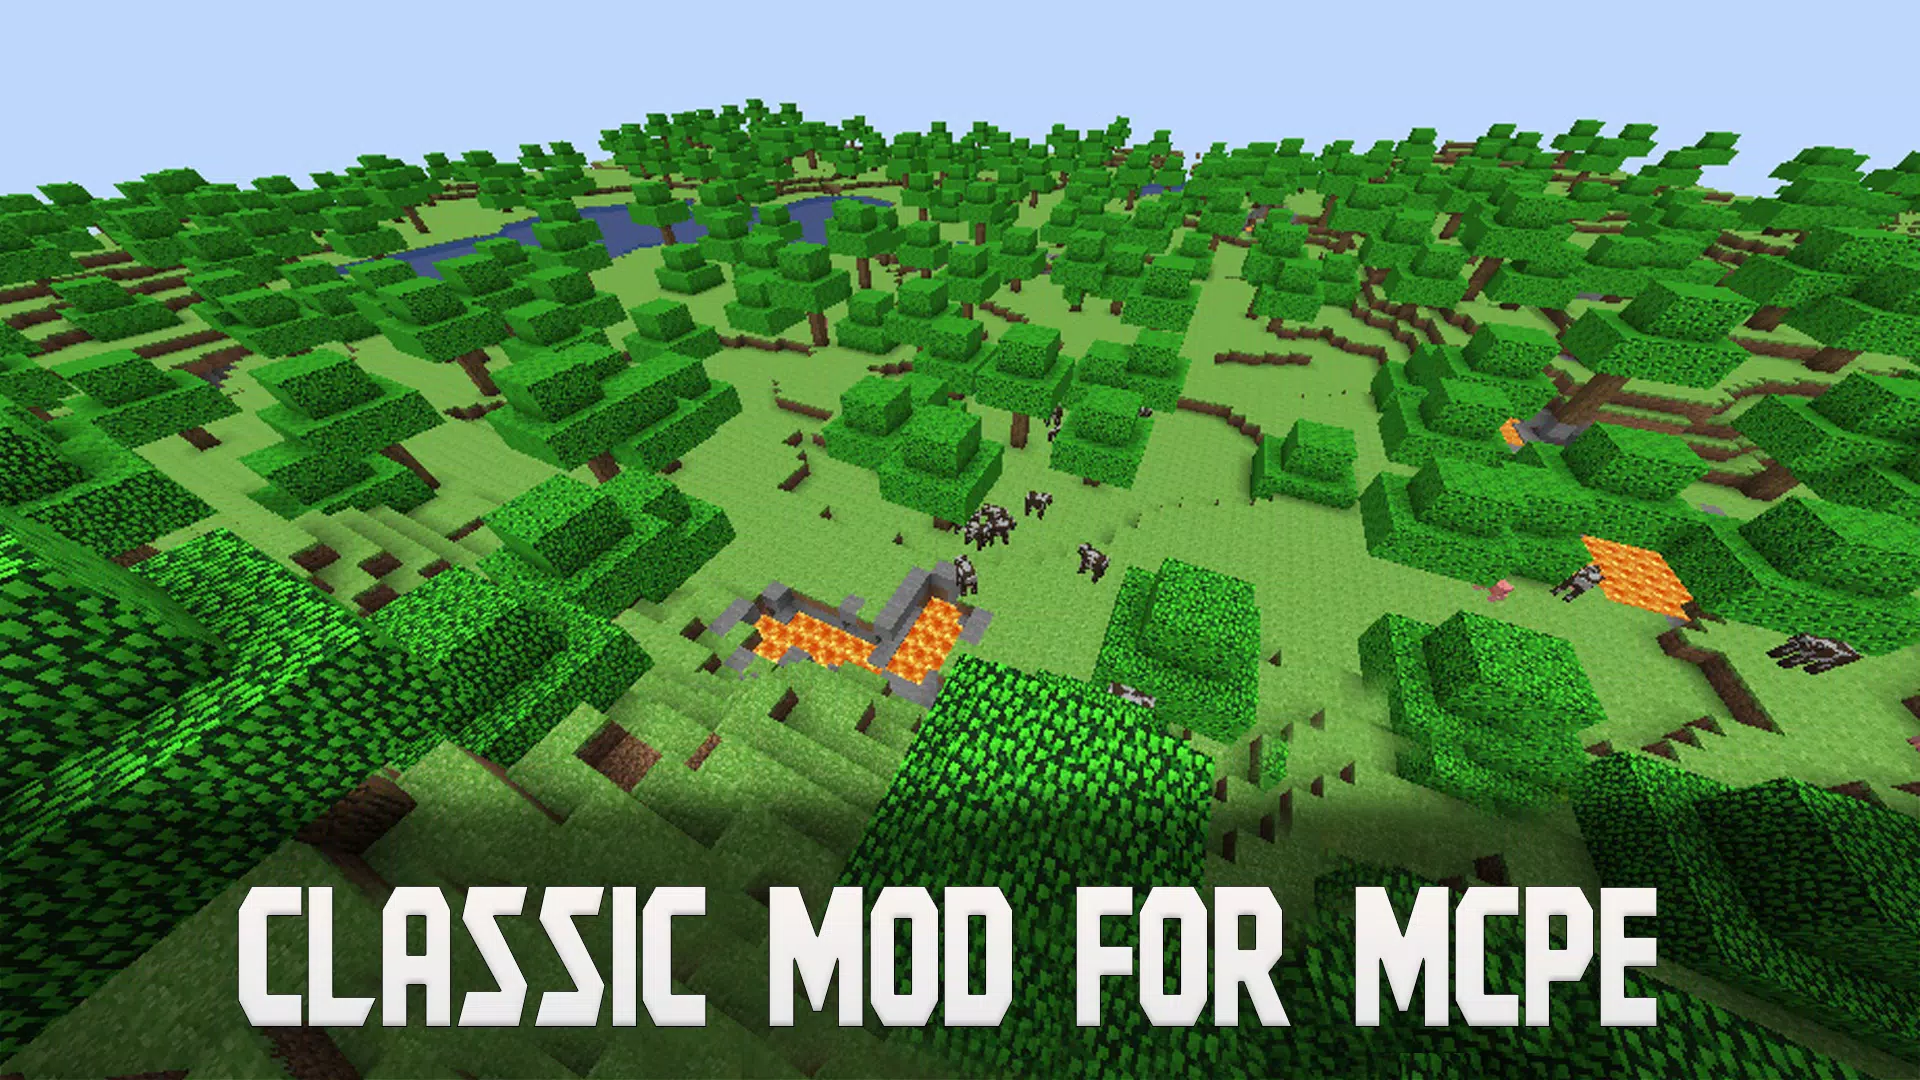 Download do APK de Classic Shaders for Minecraft para Android